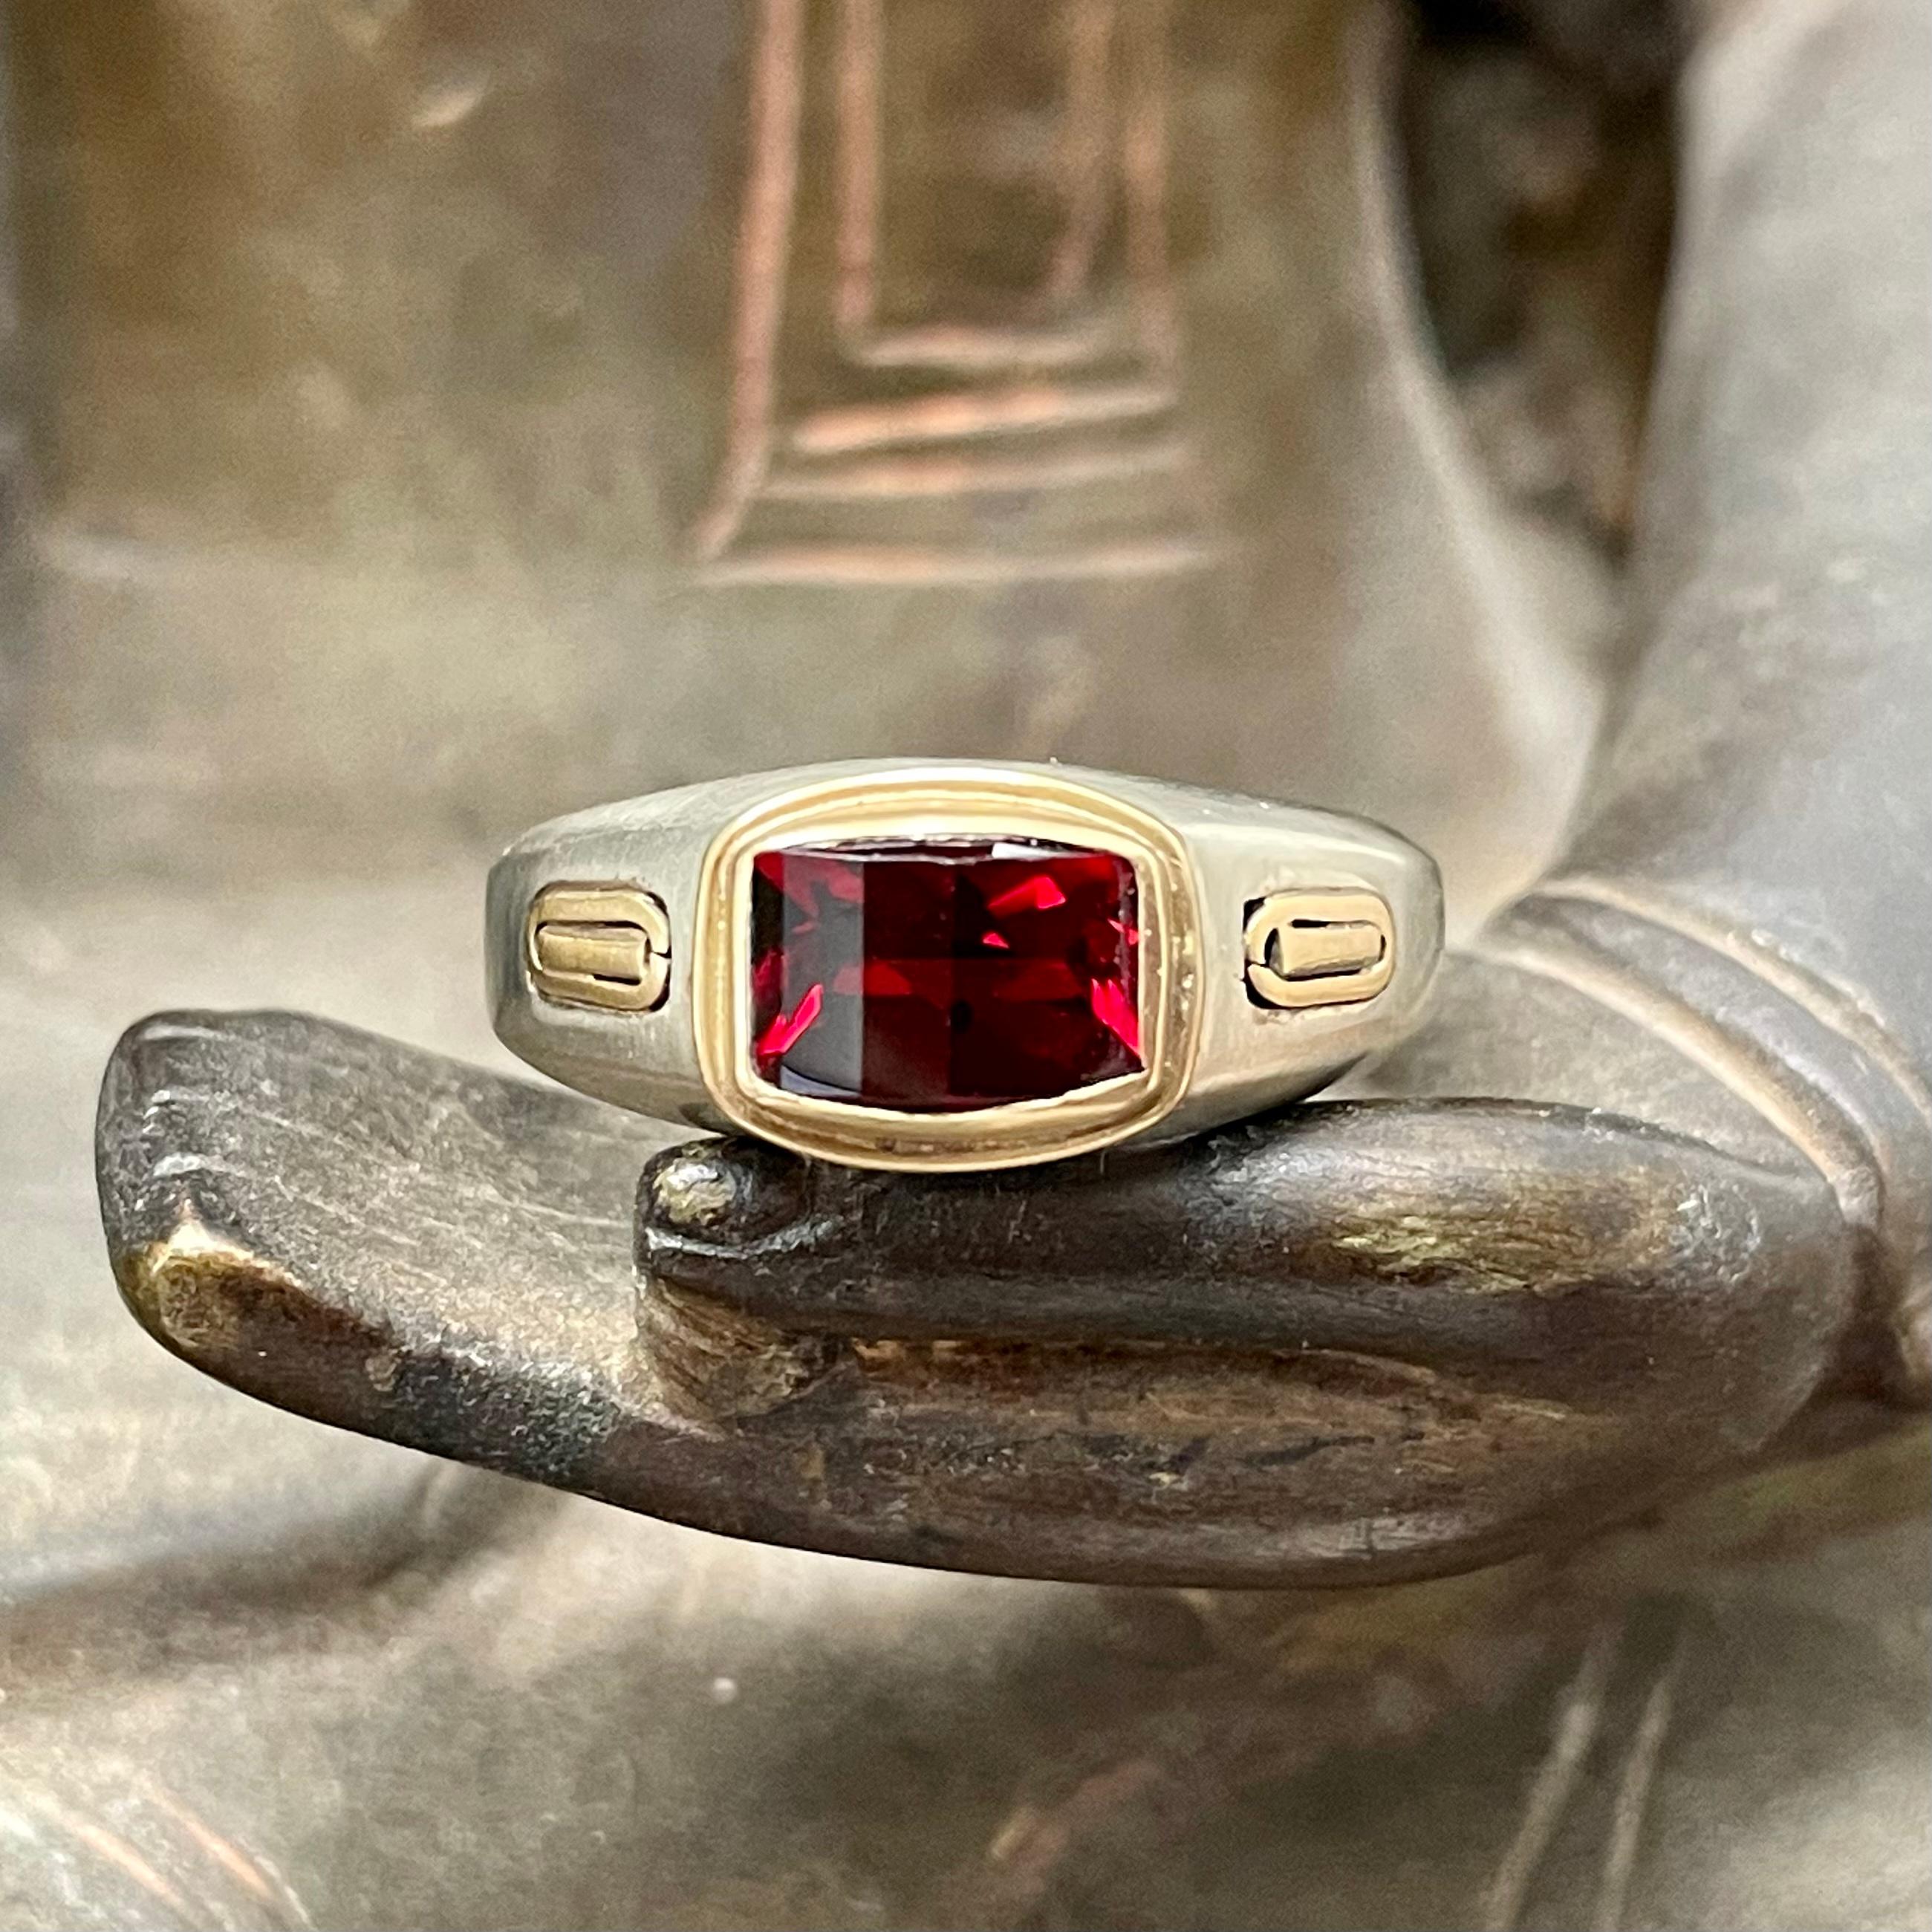 An interesting barrel-cut 6 x 8 mm Mozambique garnet is set within an 18K yellow gold mount with side accent 18K yellow gold bars in a somewhat flat tapered matte-finish 14K white gold shank in this design.  A clean and nicely balanced modern look.